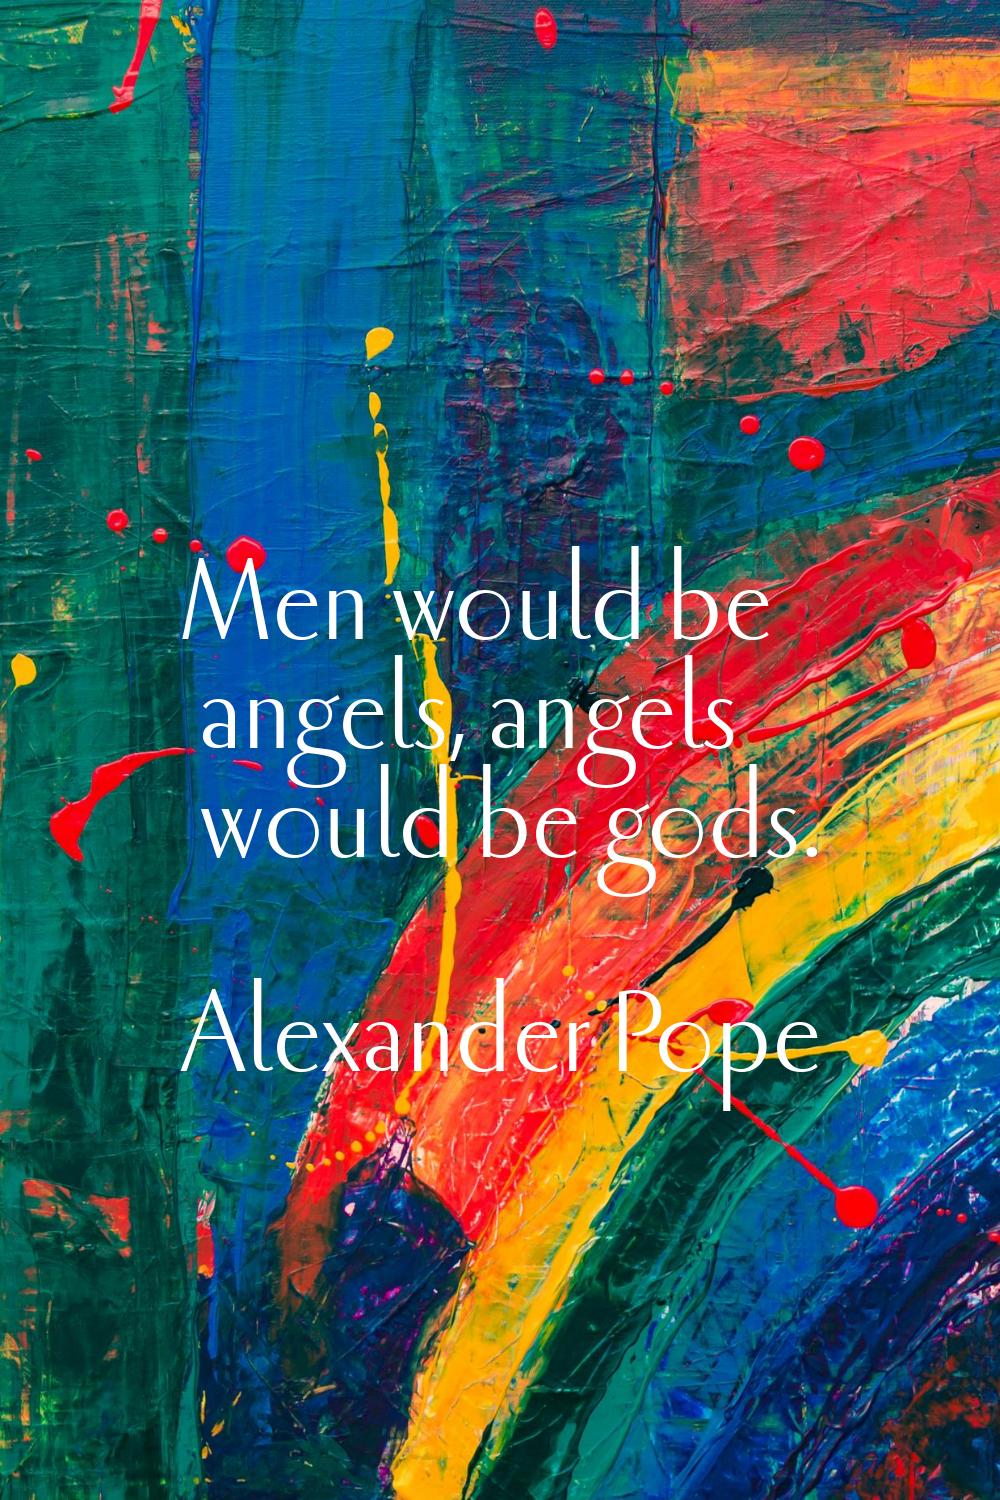 Men would be angels, angels would be gods.